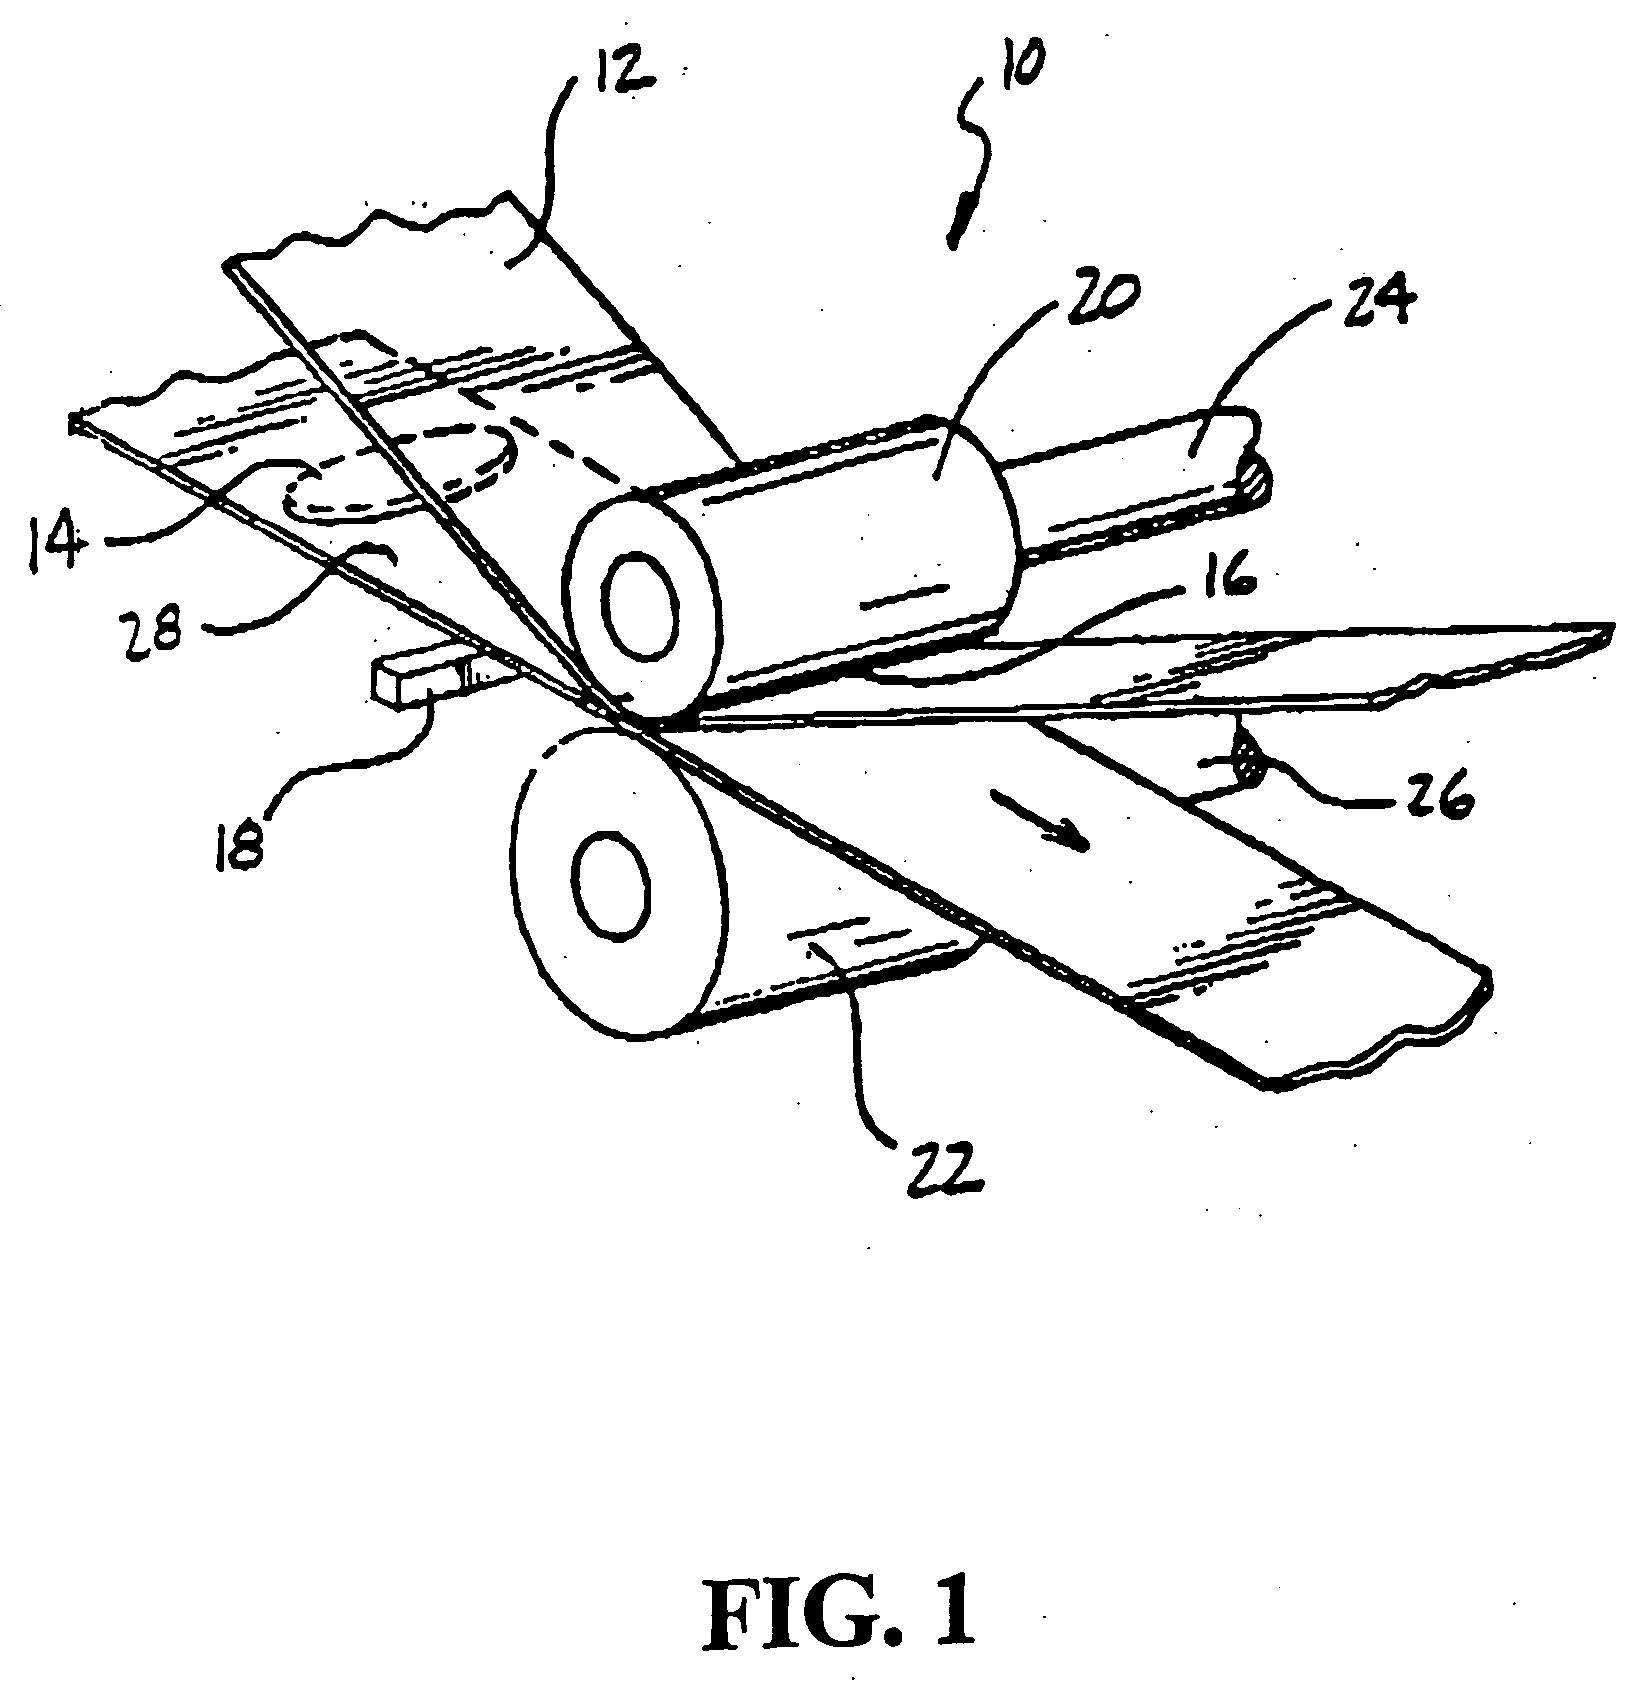 Method and apparatus for forming microstructures on polymeric substrates